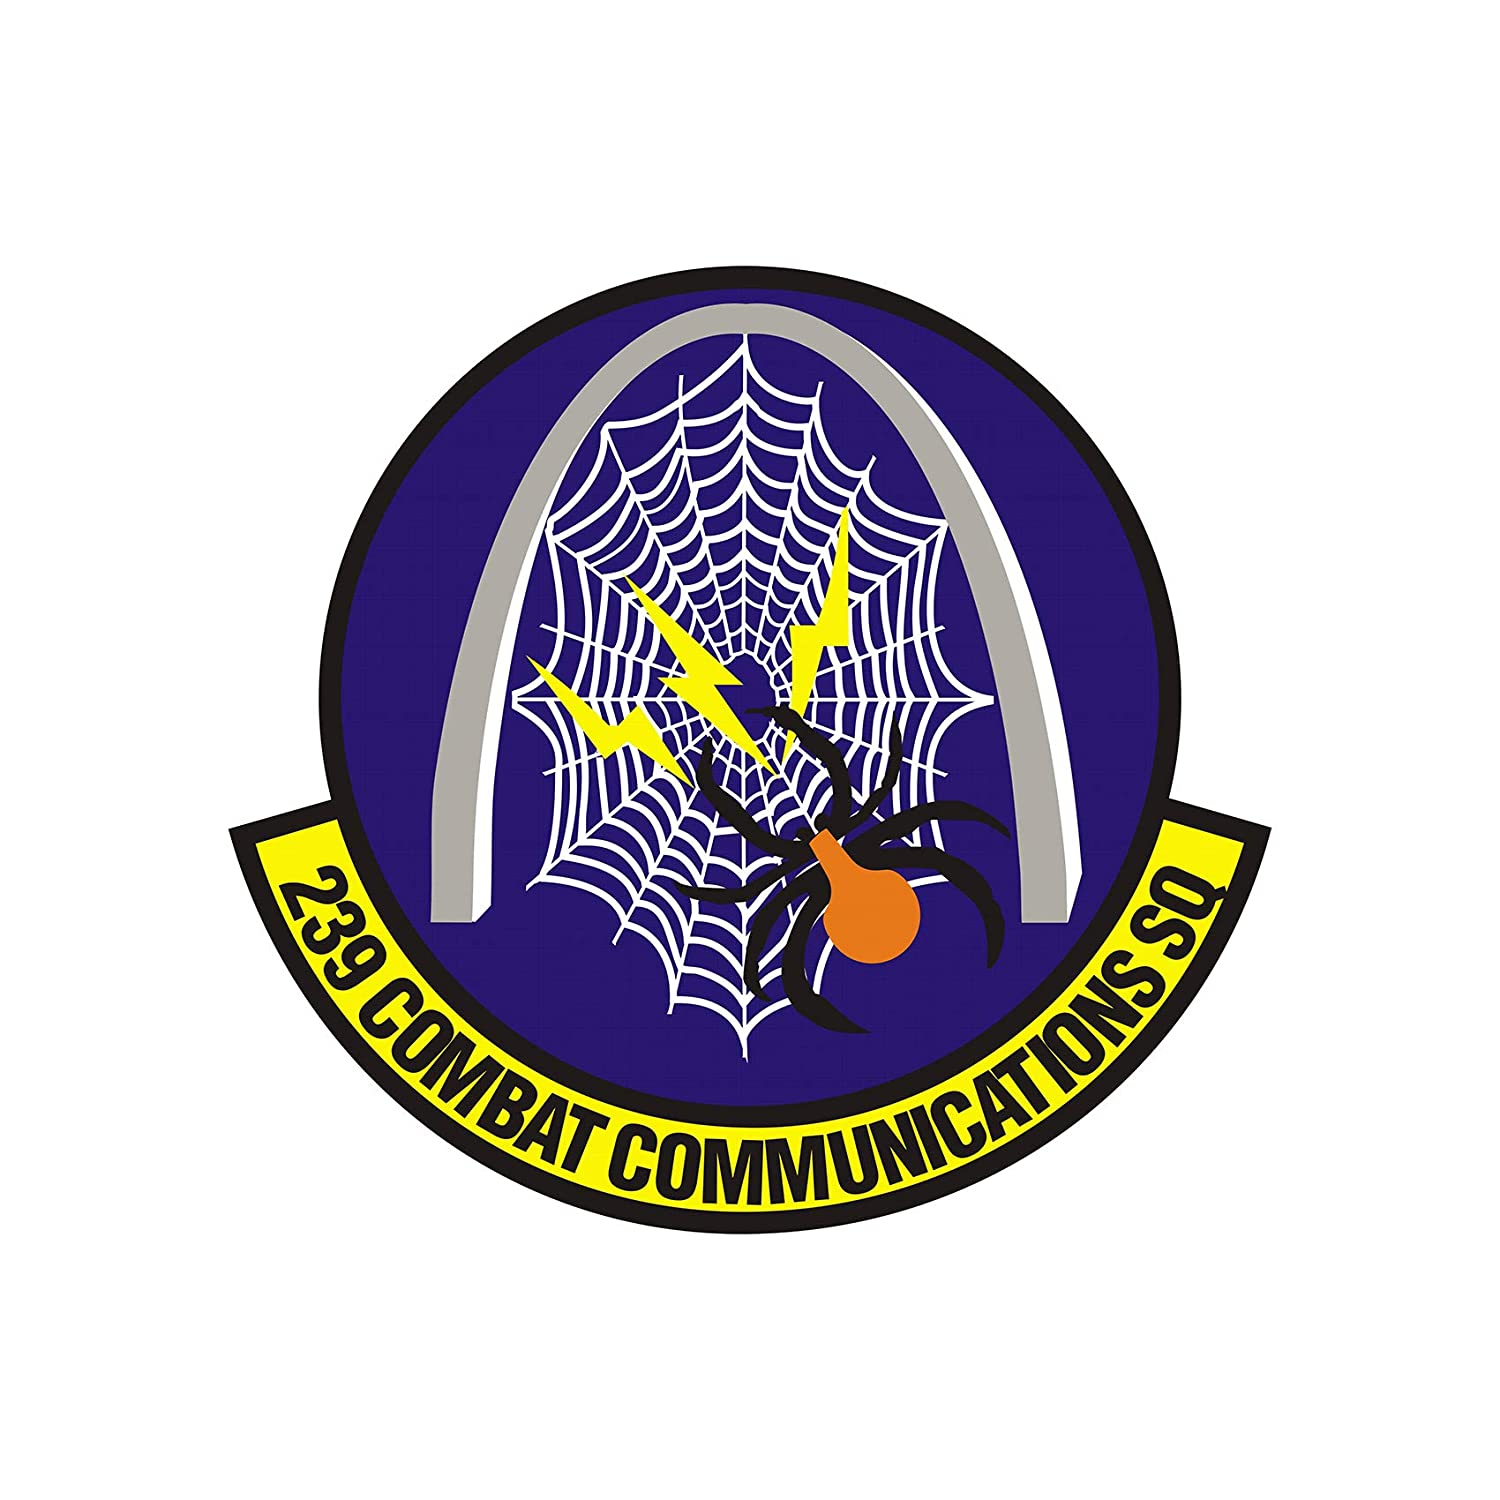 239th Combat Communications Squadron - Patch Vinyl Decal - Available in Multiple Sizes